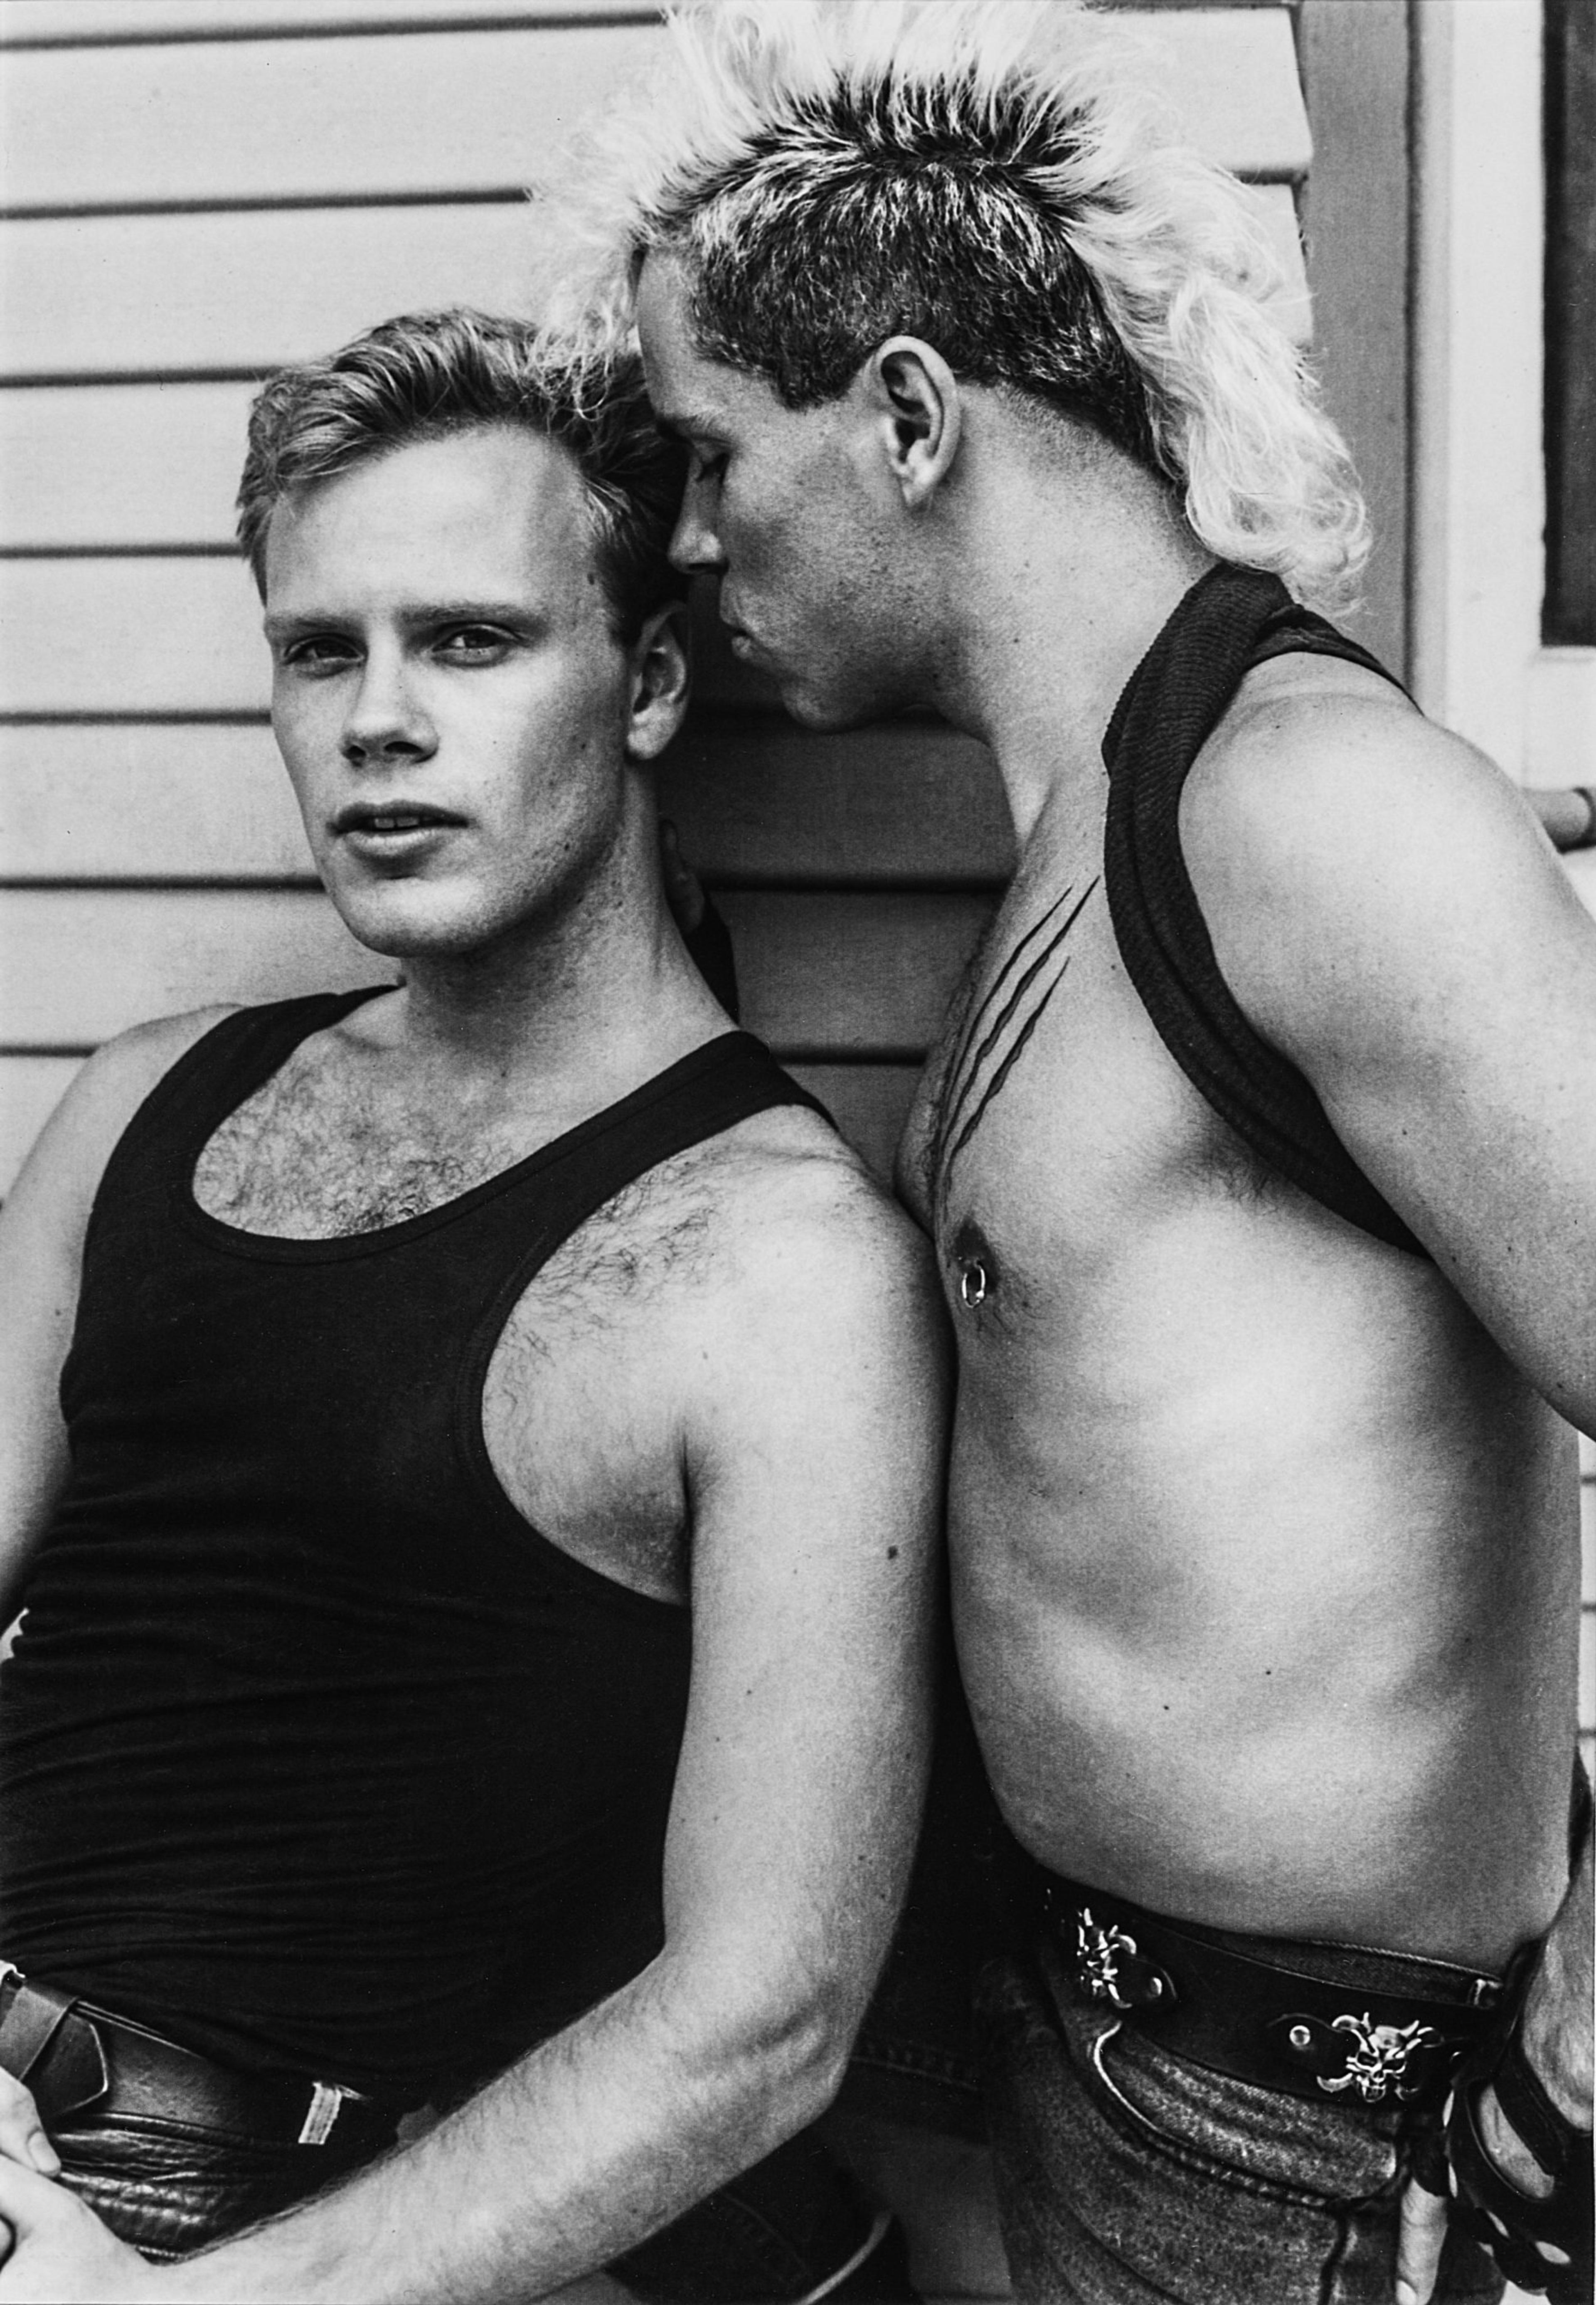 A black and white photograph of a shirtless man with a mohawk whispering to another man in a black tank top